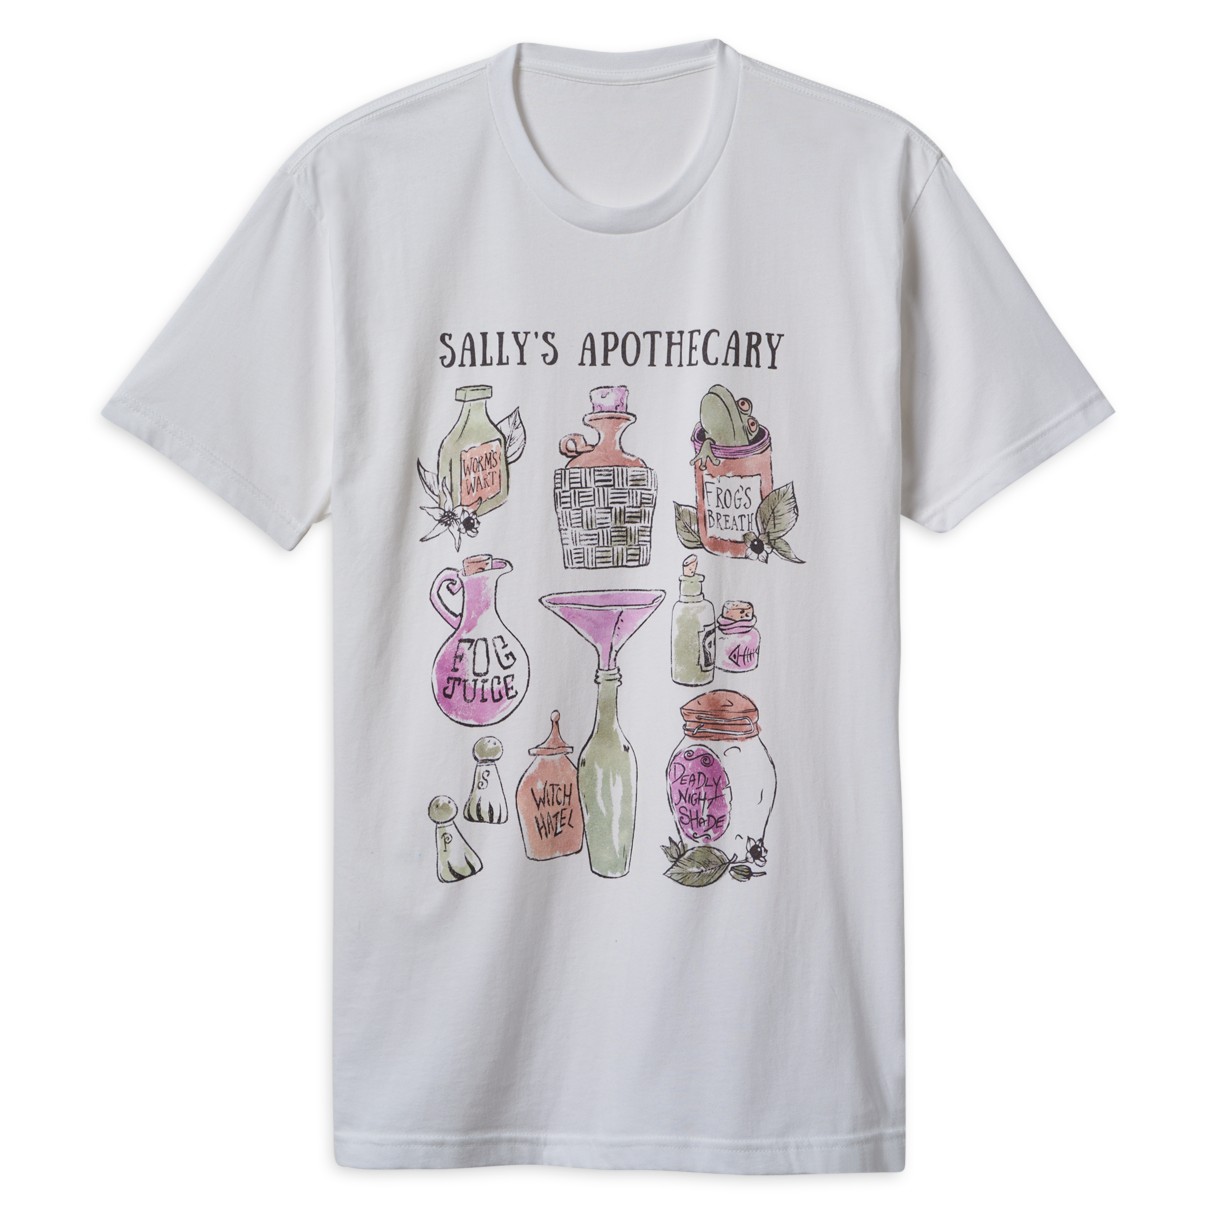 ''Sally's Apothecary'' T-Shirt for Adults – The Nightmare Before Christmas